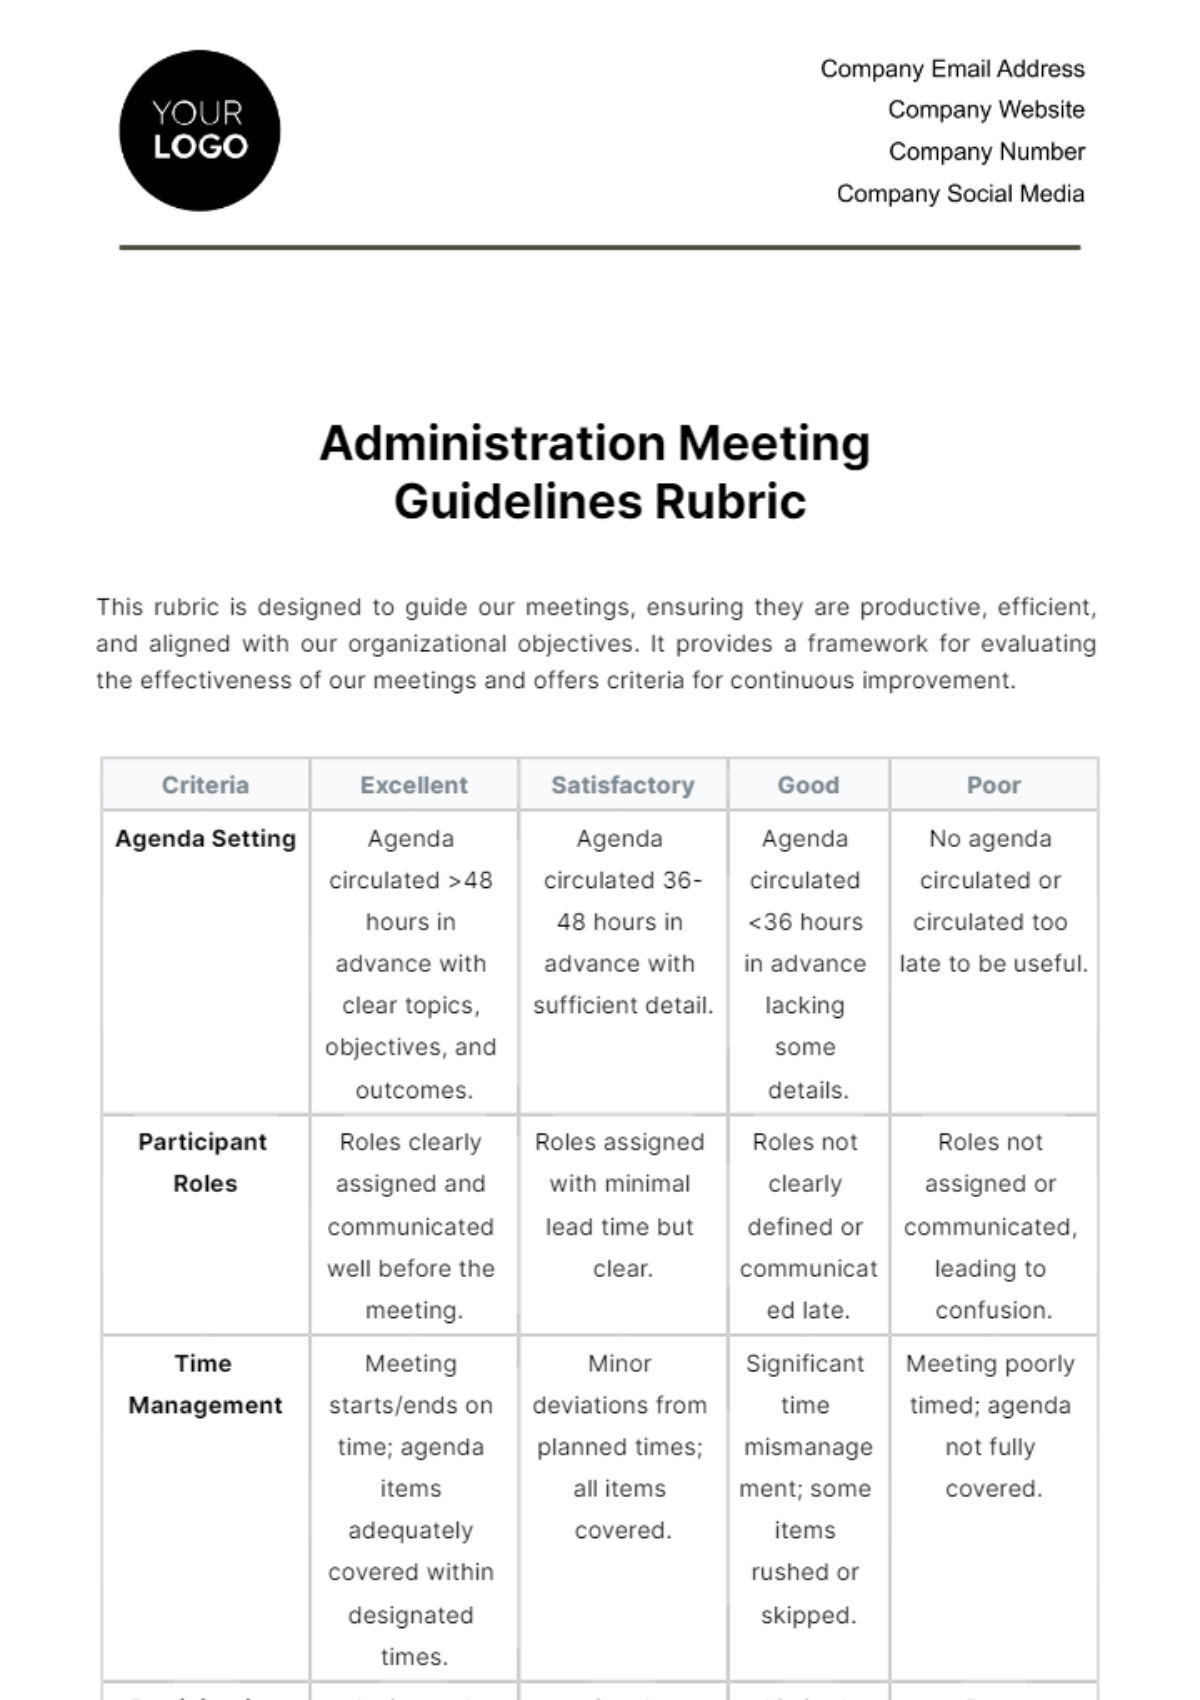 Free Administration Meeting Guidelines Rubric Template